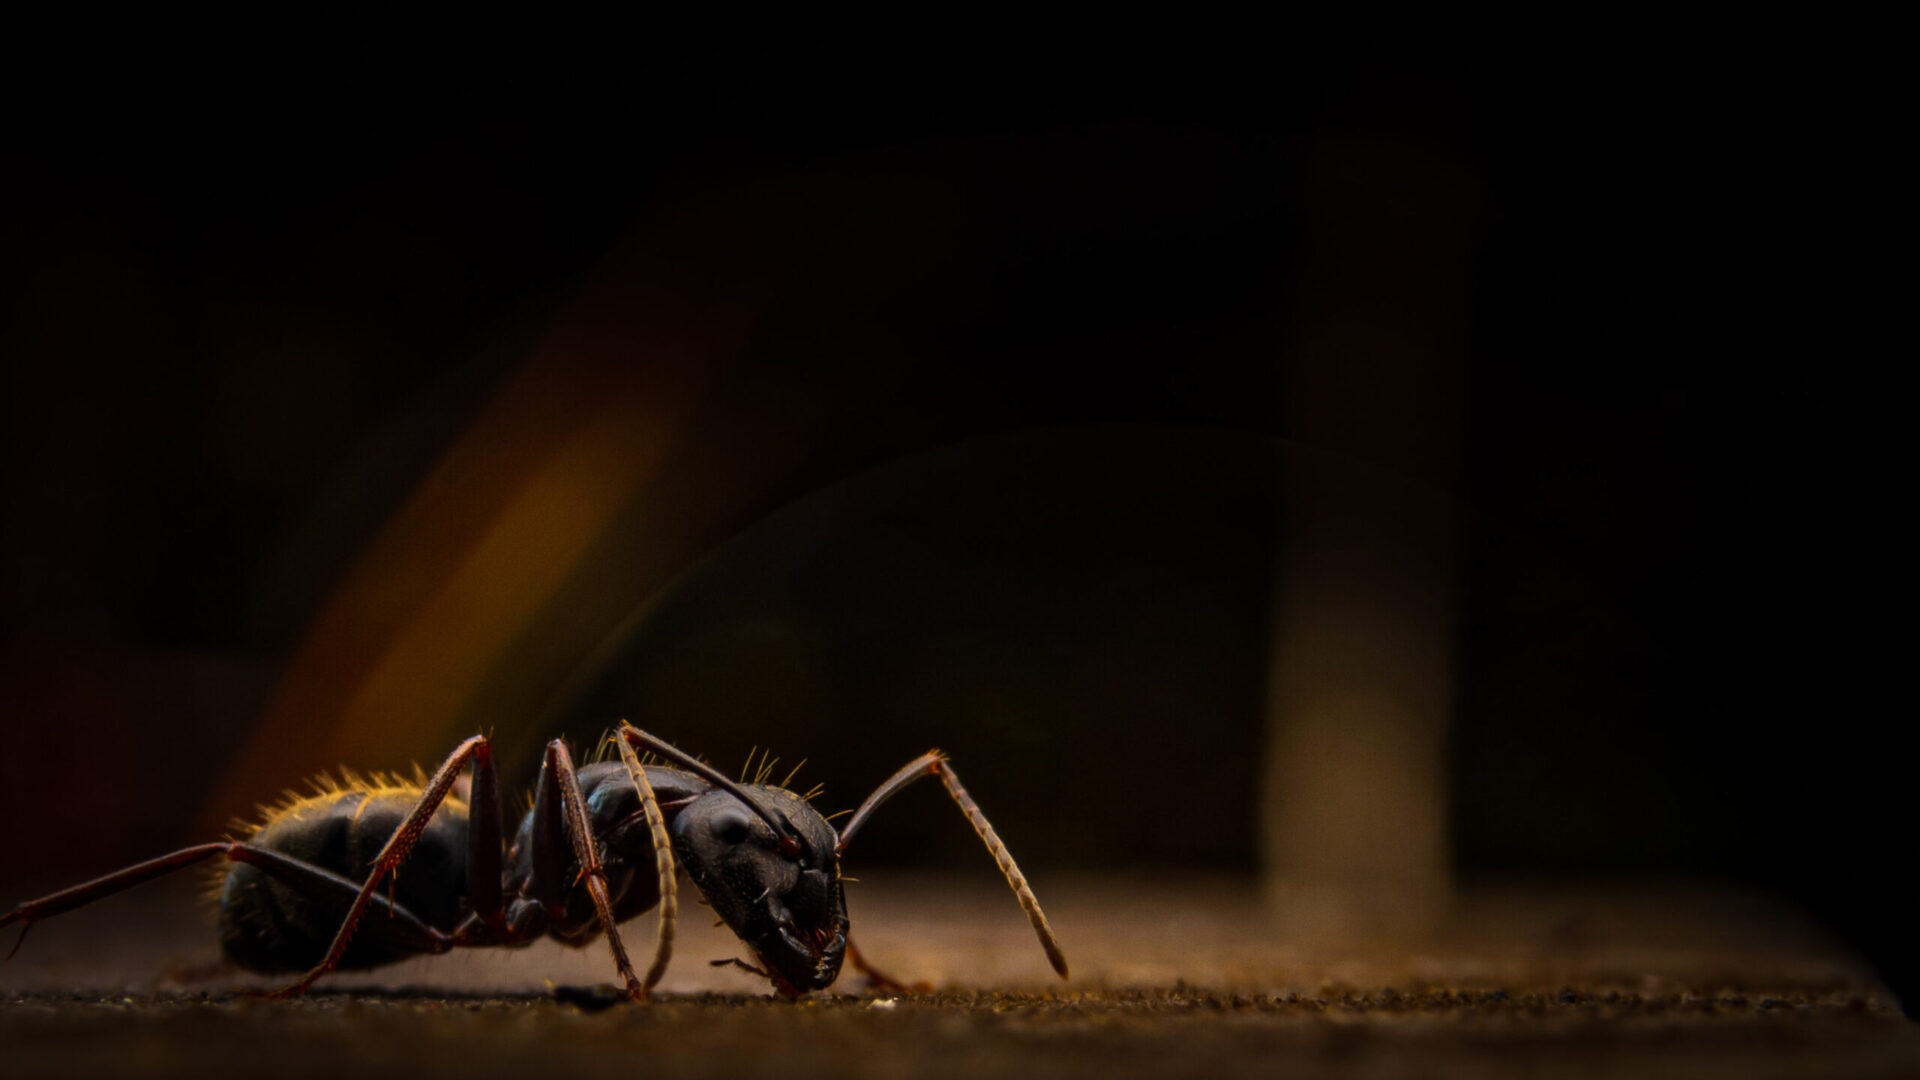 A Camponotus pennsylvanicus worker searches for food.